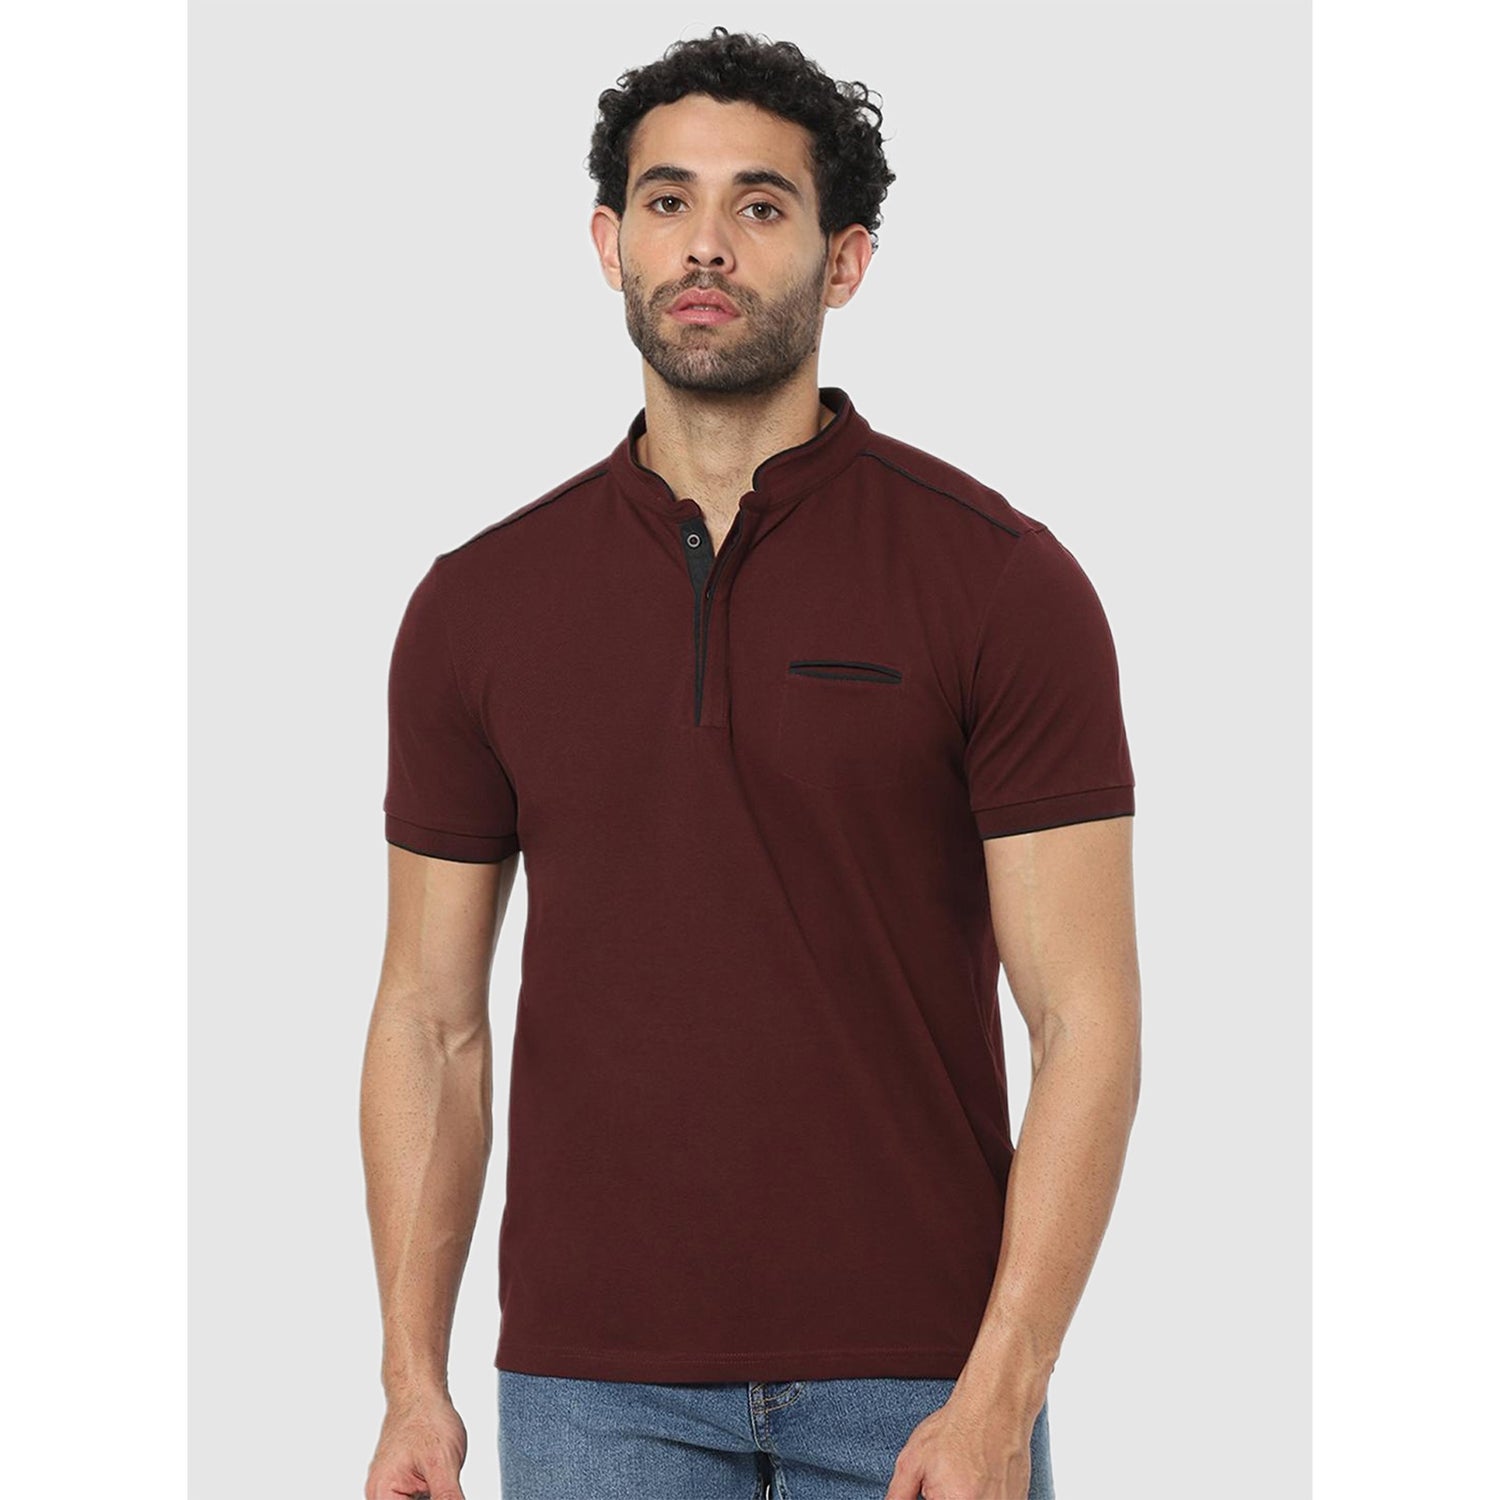 Maroon Solid Slim Fit T-Shirt (Various Sizes)